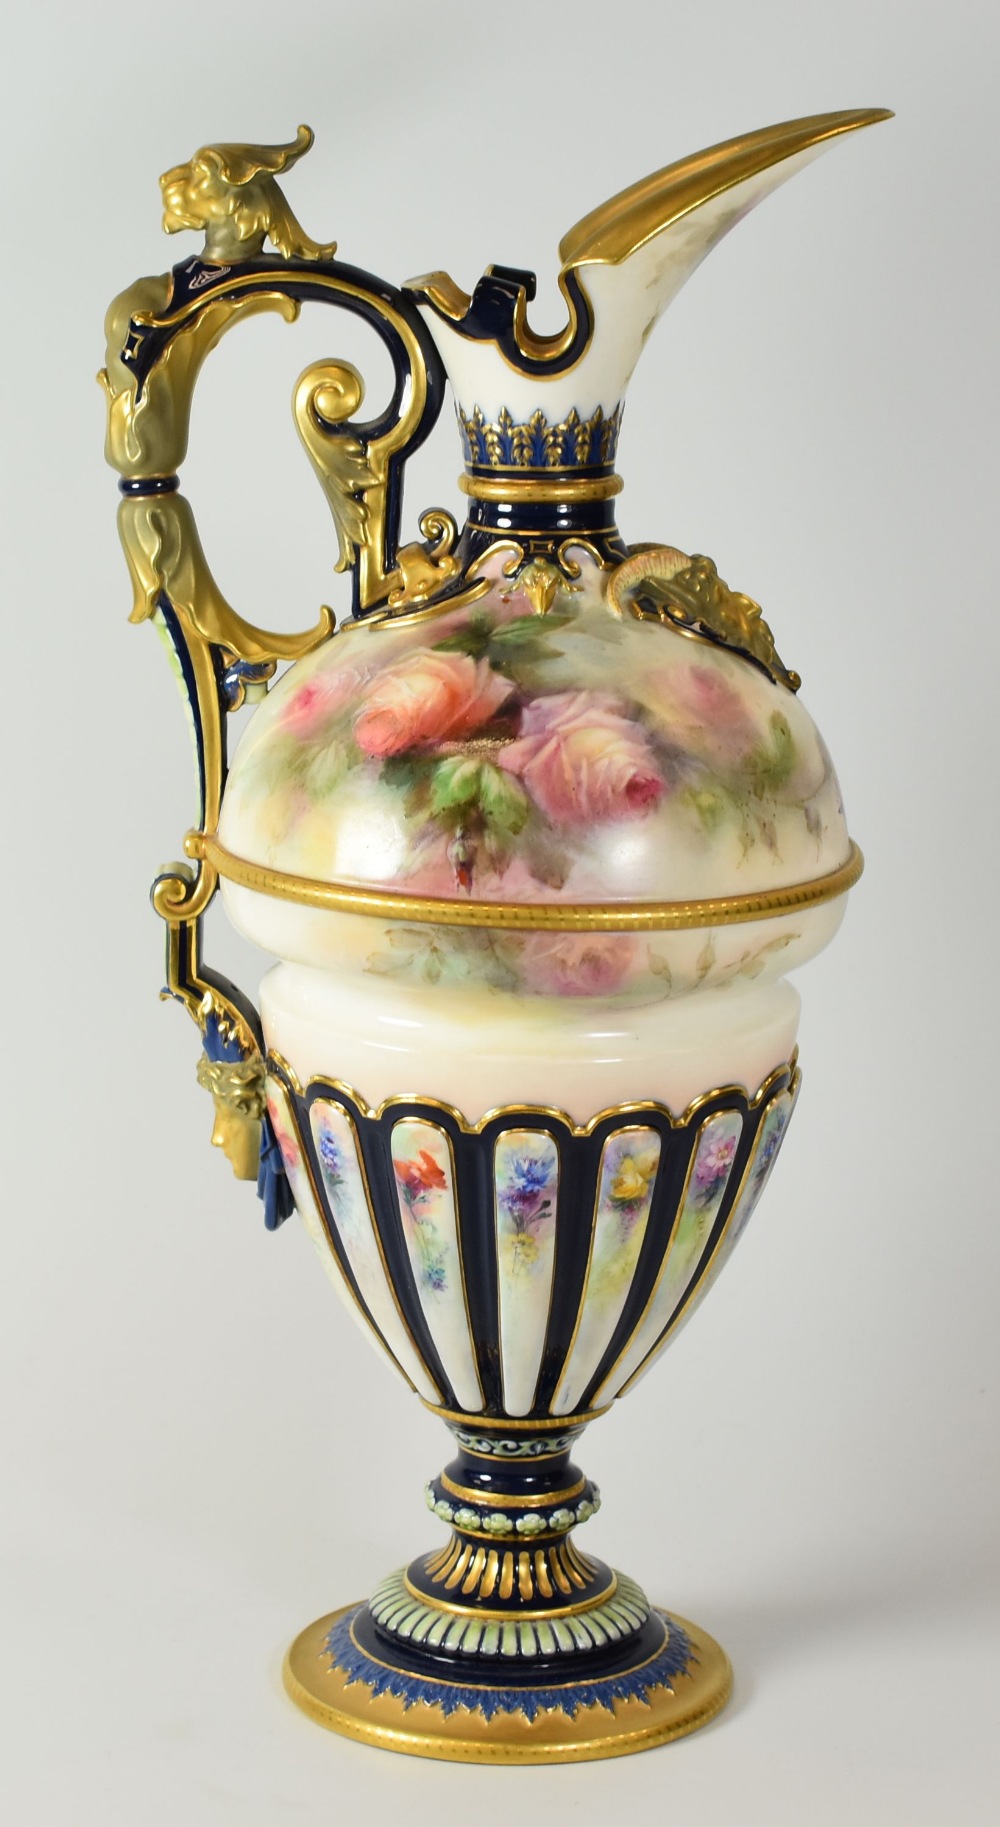 A HADLEY WORCESTER CLARET JUG of elaborate Classical form with spear spout and fluted decoration - Image 2 of 2